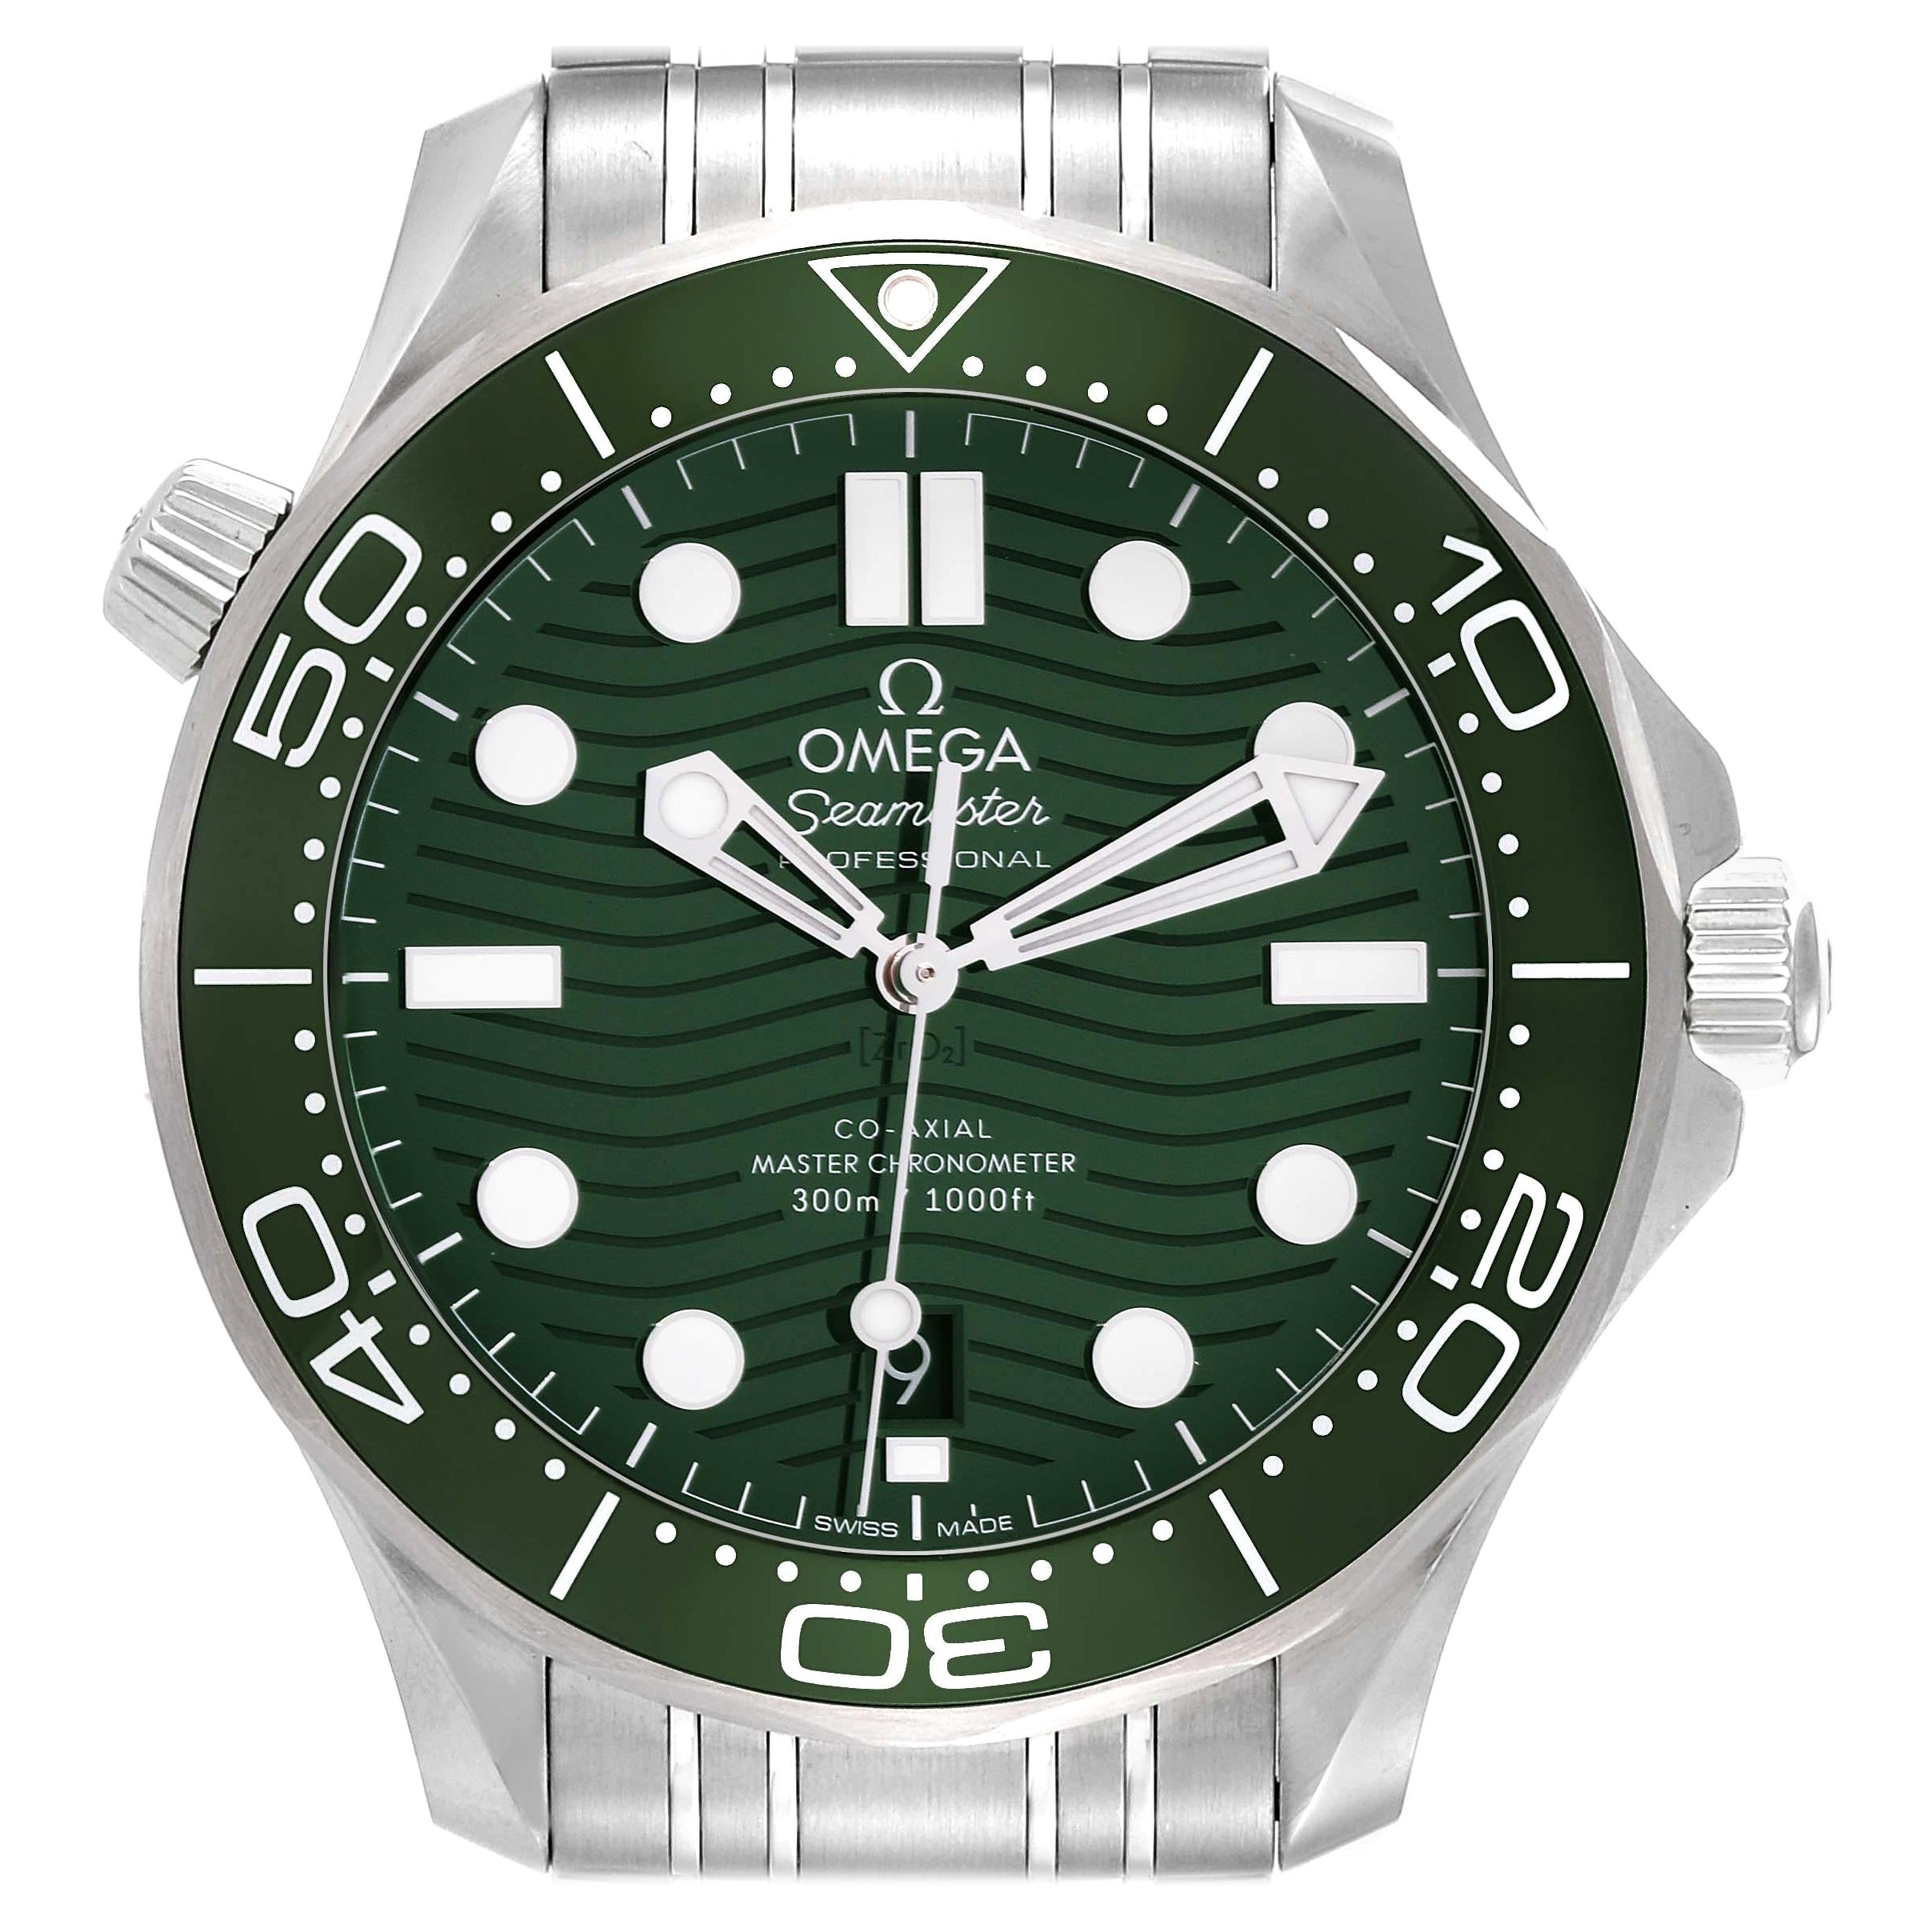 Omega Seamaster Diver Green Dial Steel Mens Watch 210.30.42.20.10.001 Unworn For Sale